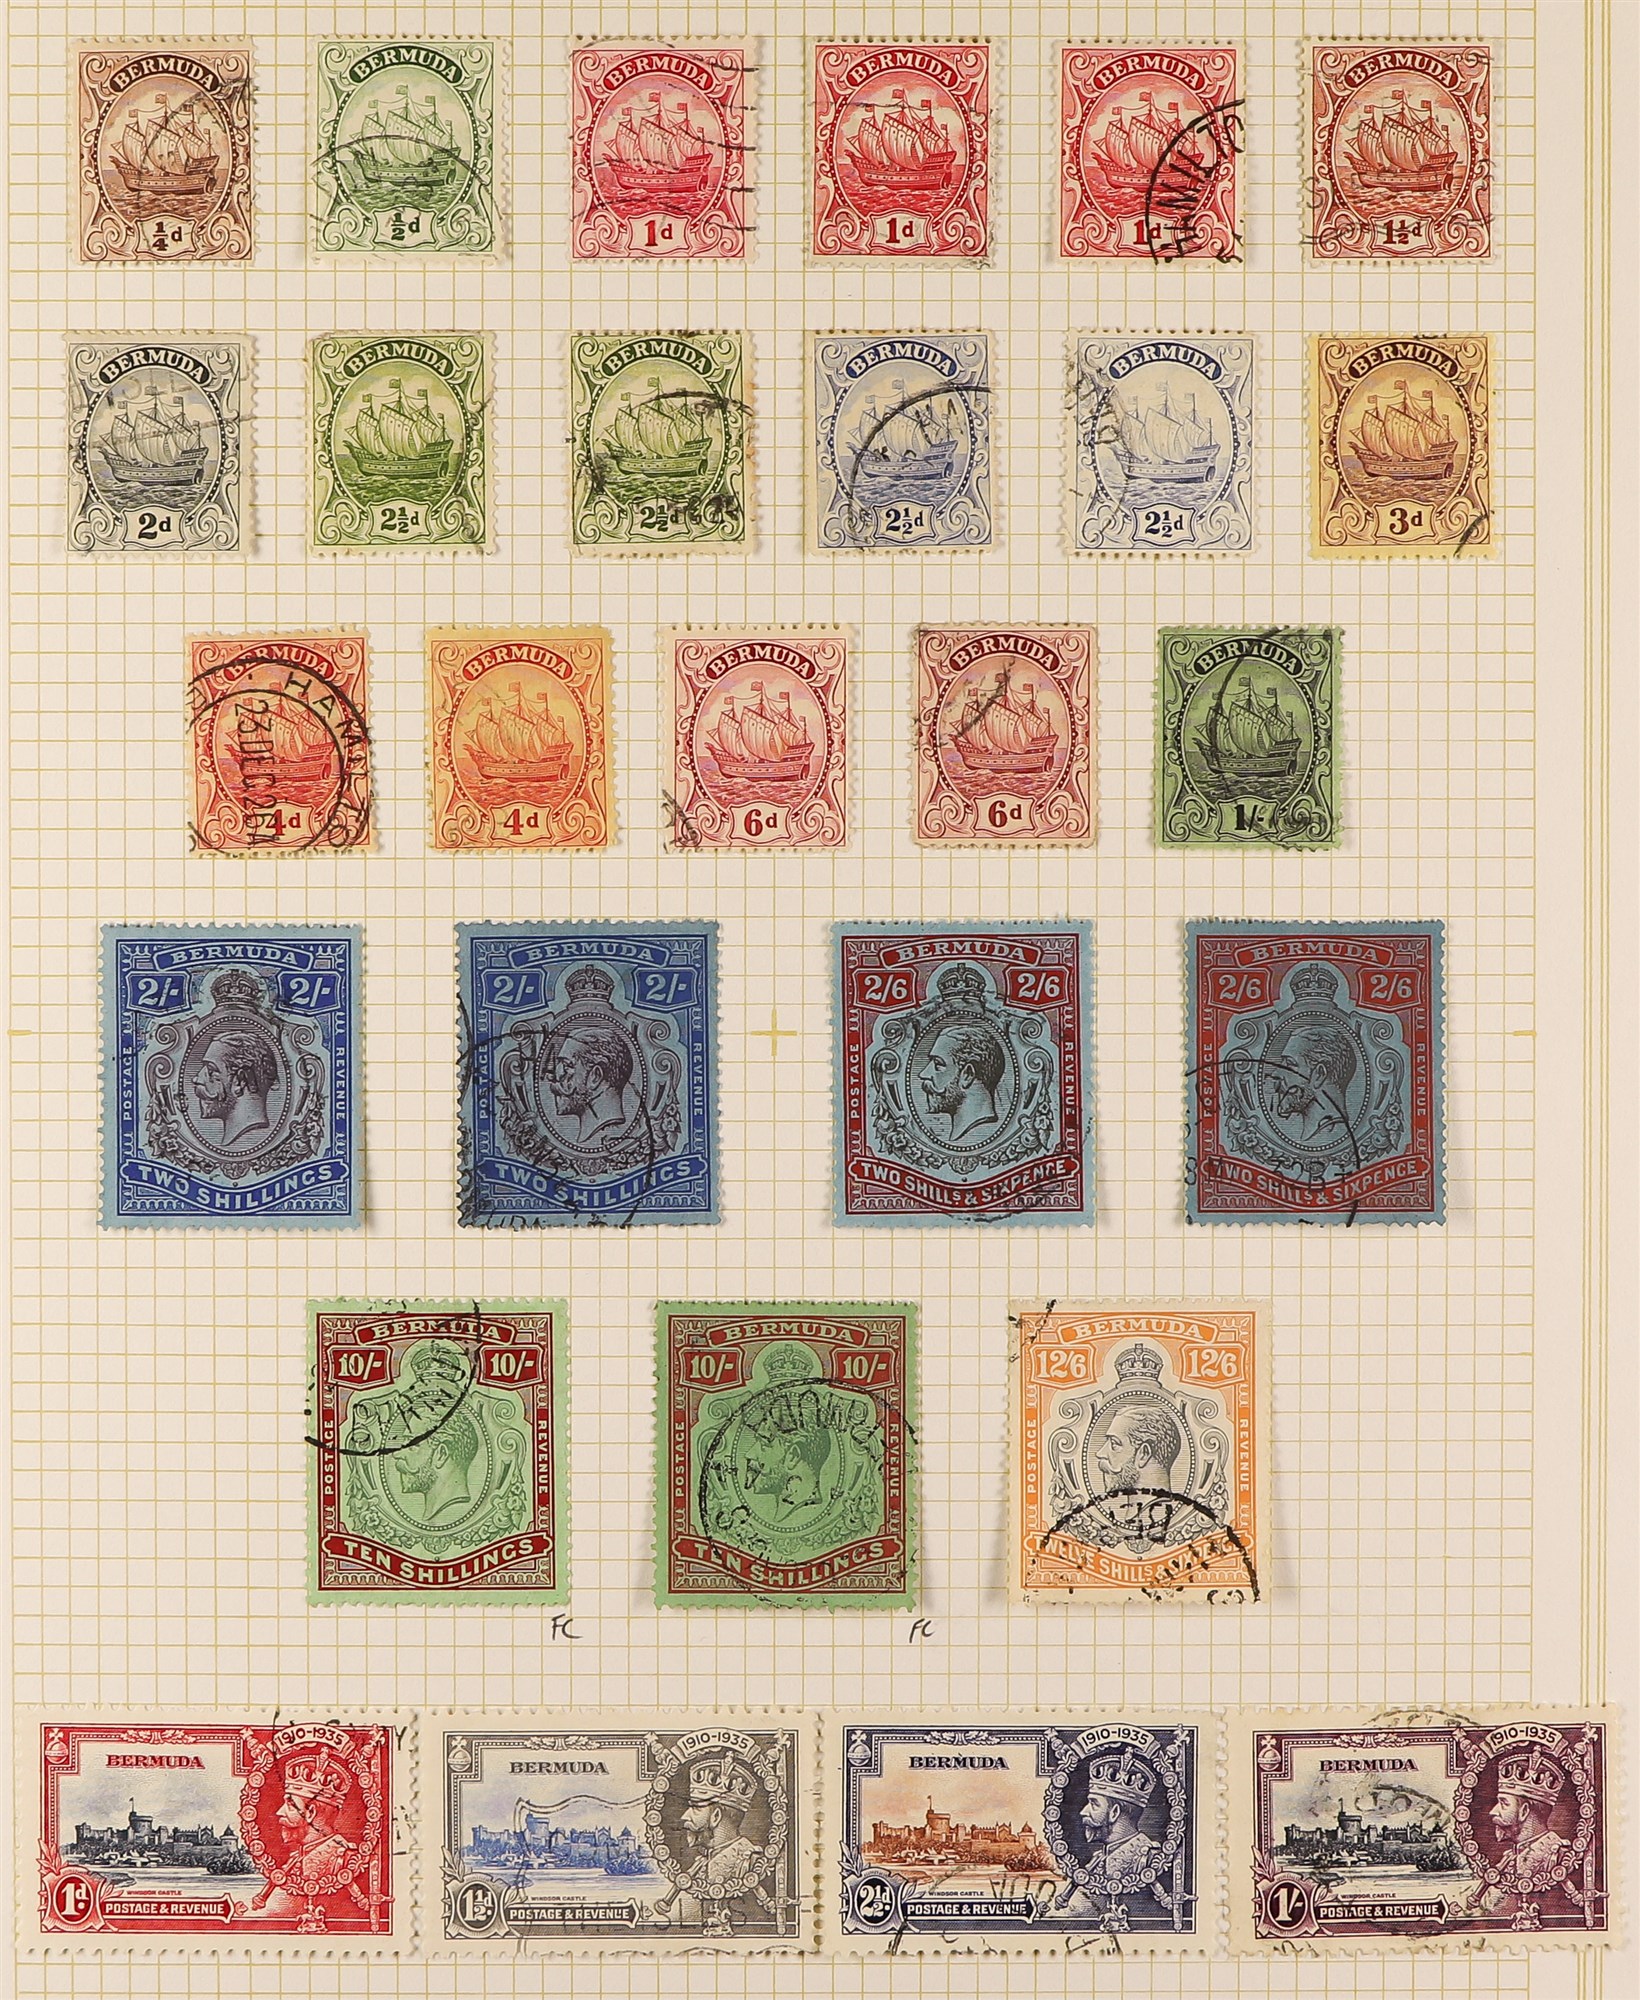 BERMUDA 1910 - 1936 USED COLLECTION of 80 stamps on album pages, note 1910-25 set with additional - Image 2 of 4